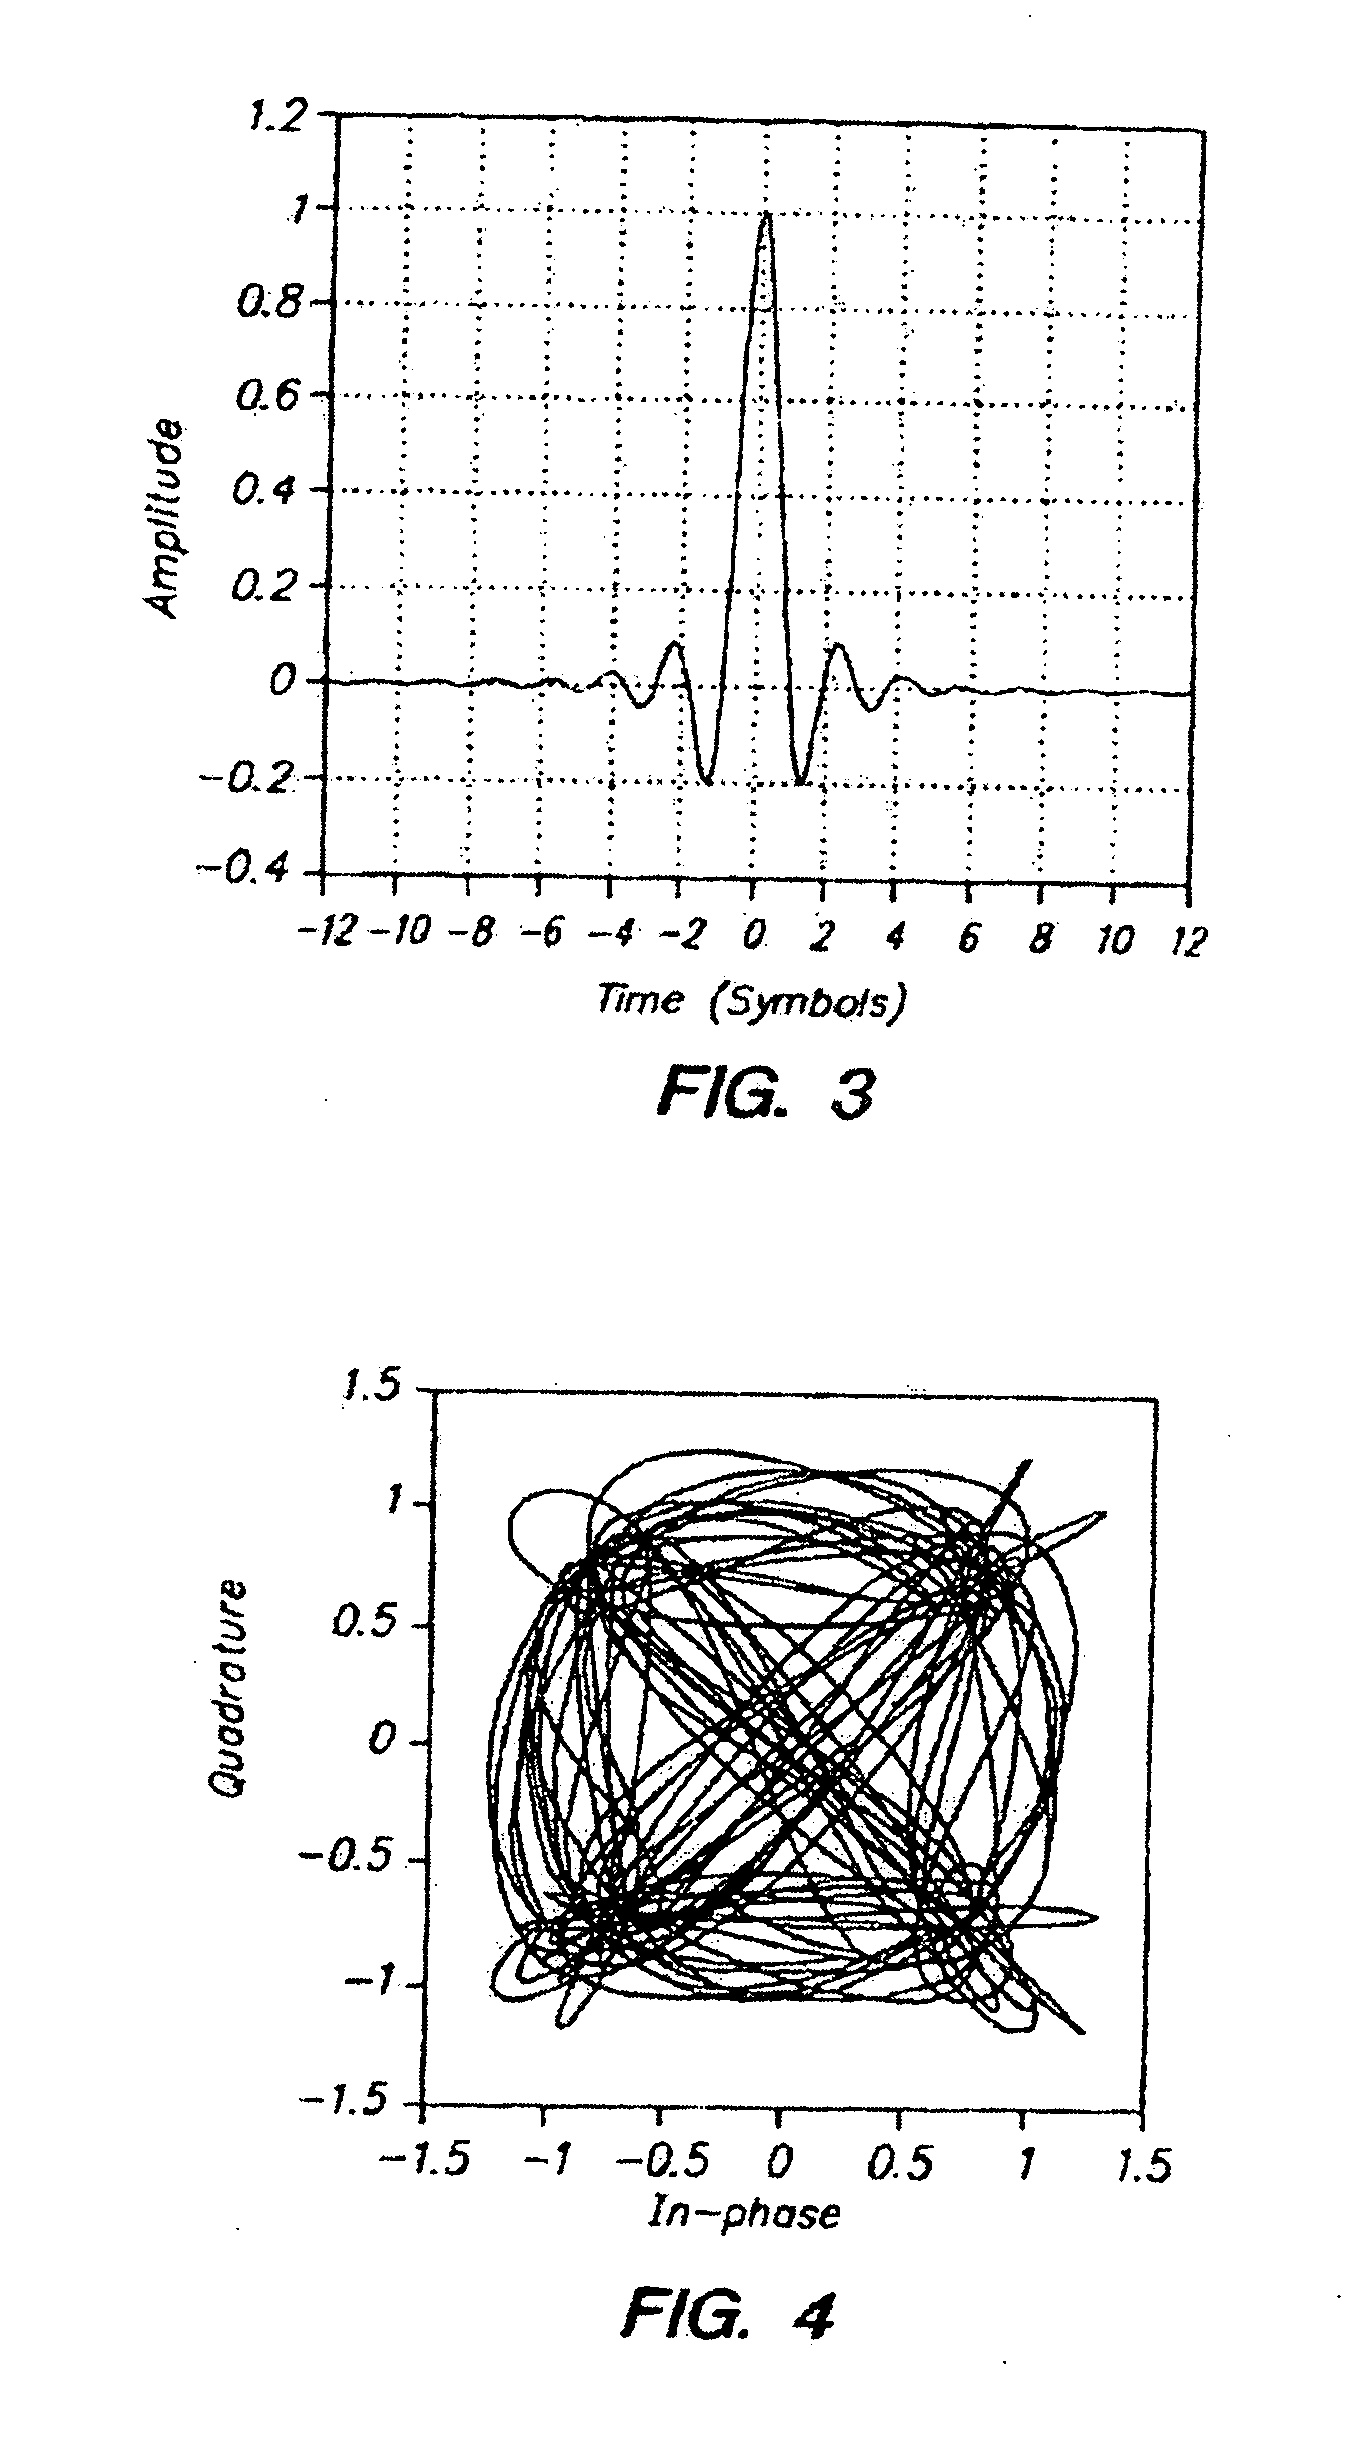 Methods and apparatus for conditioning communications signals based on detection of high-frequency events in polar domain